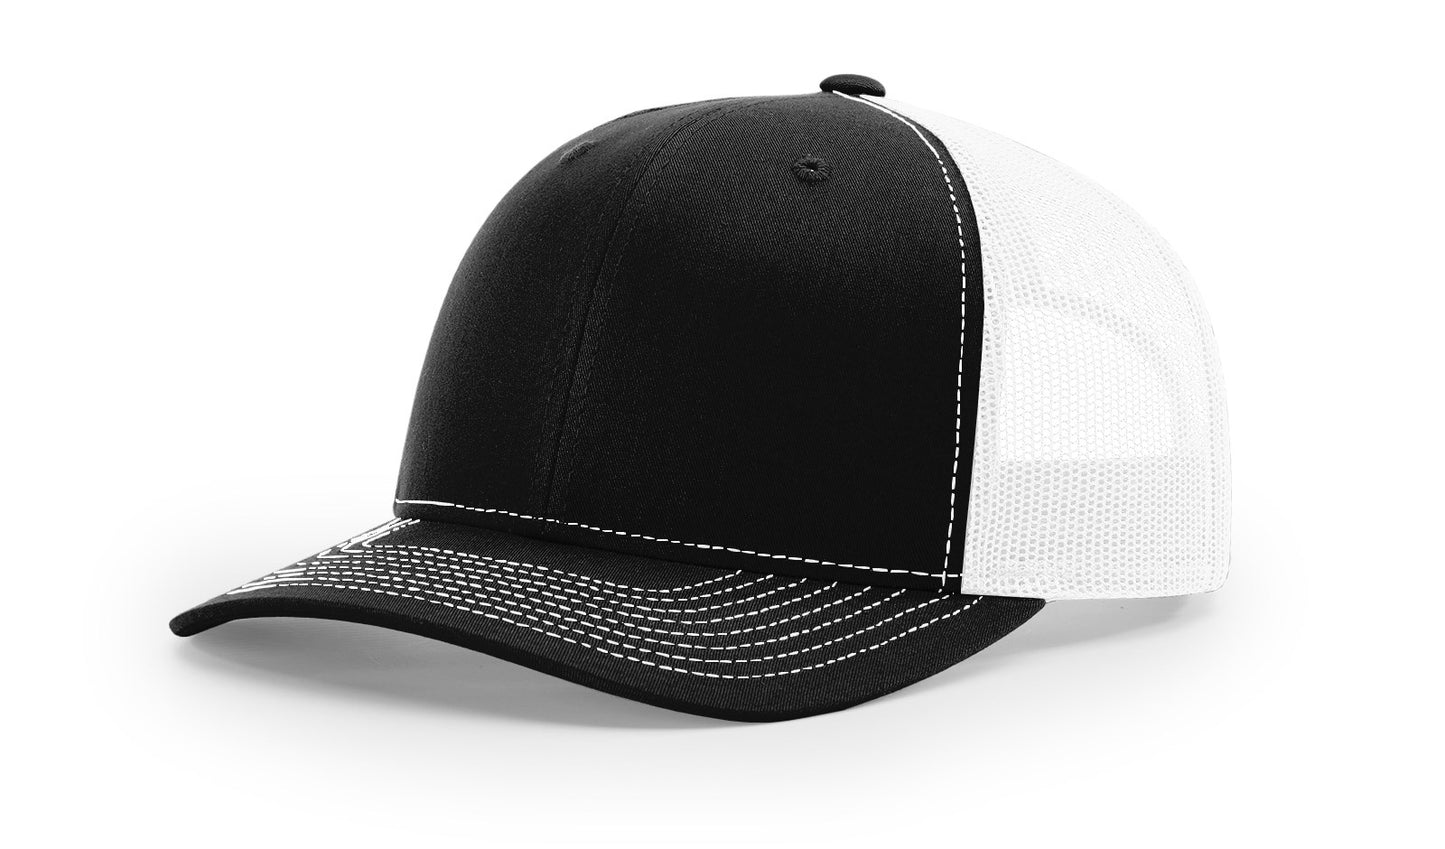 Richardson 112 Trucker Hat with custom leather patch